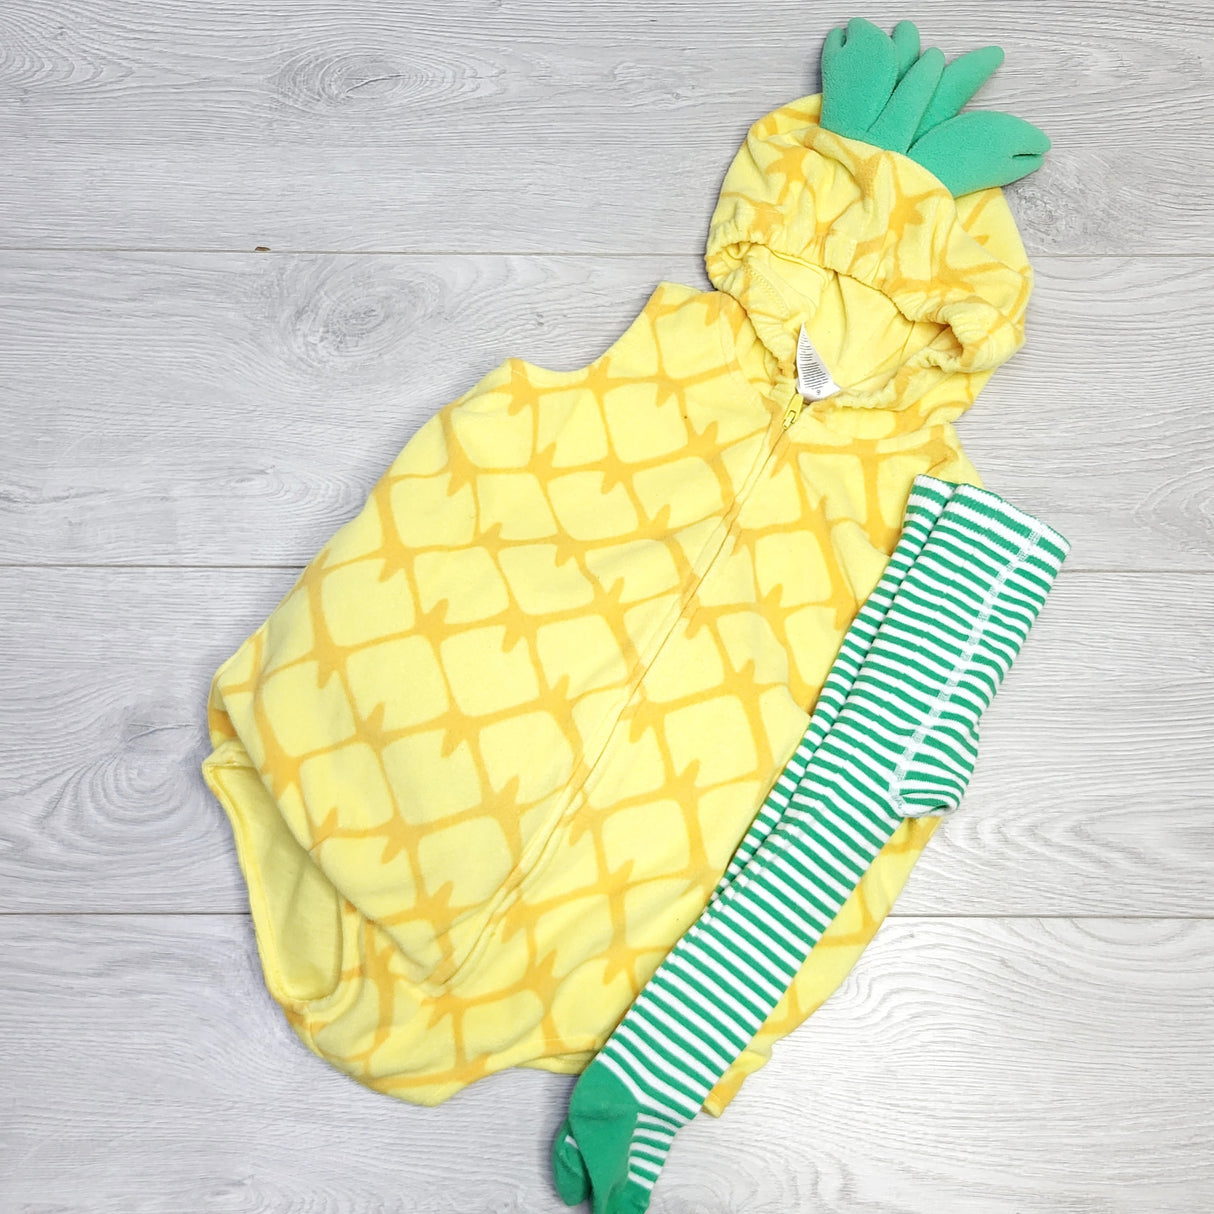 MSK1 - Carters 2pc pineapple costume. Size 24 months